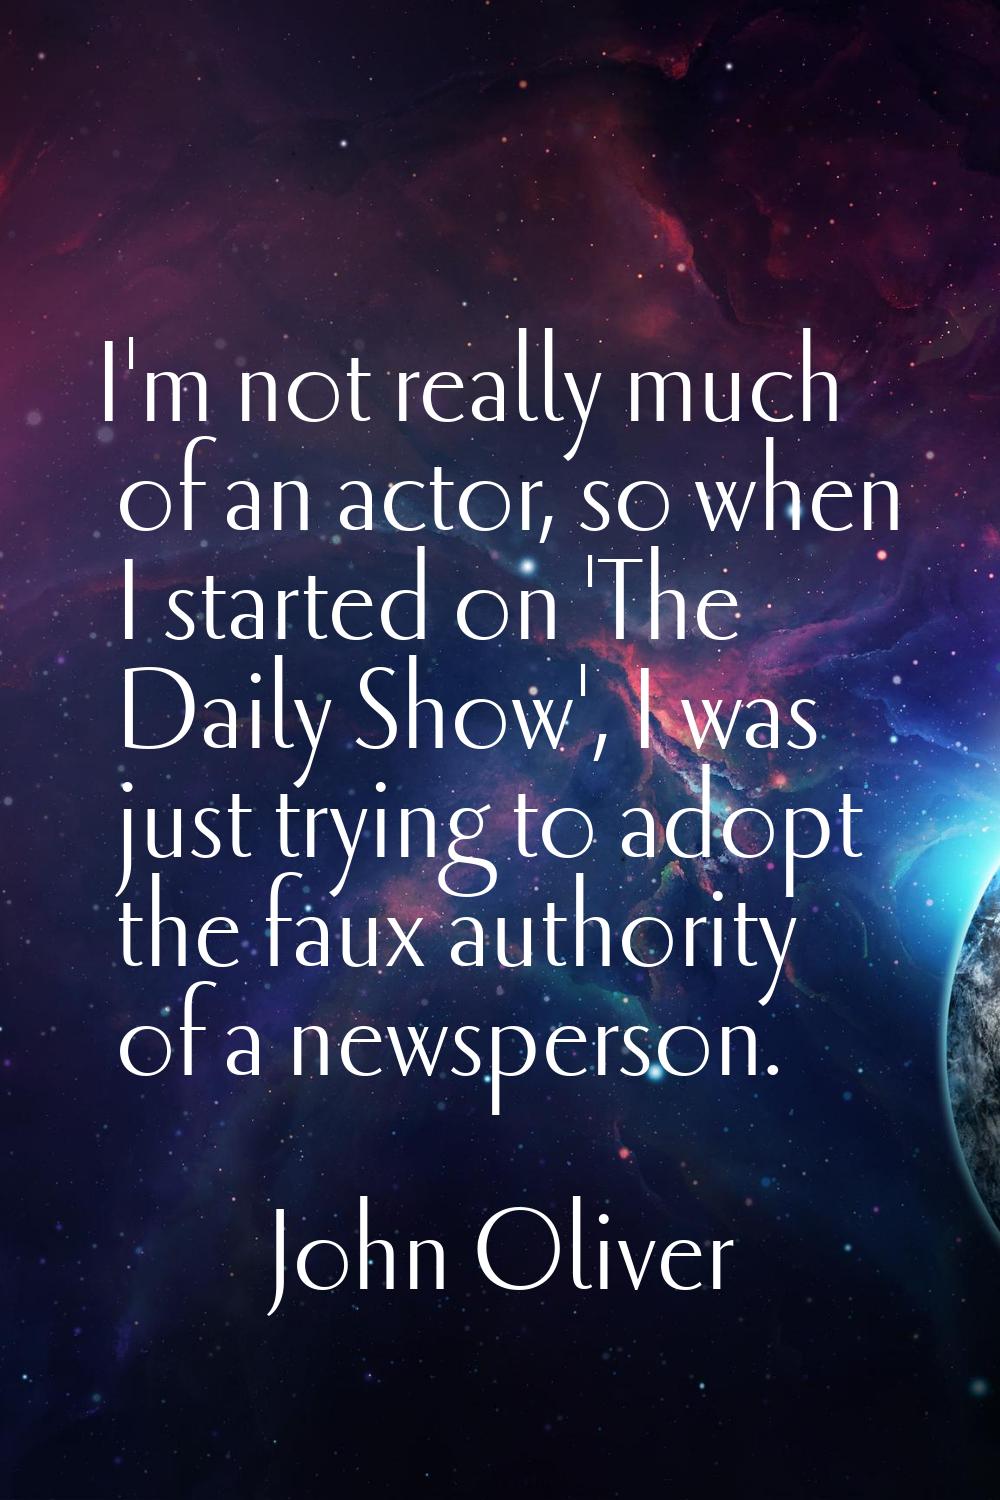 I'm not really much of an actor, so when I started on 'The Daily Show', I was just trying to adopt 